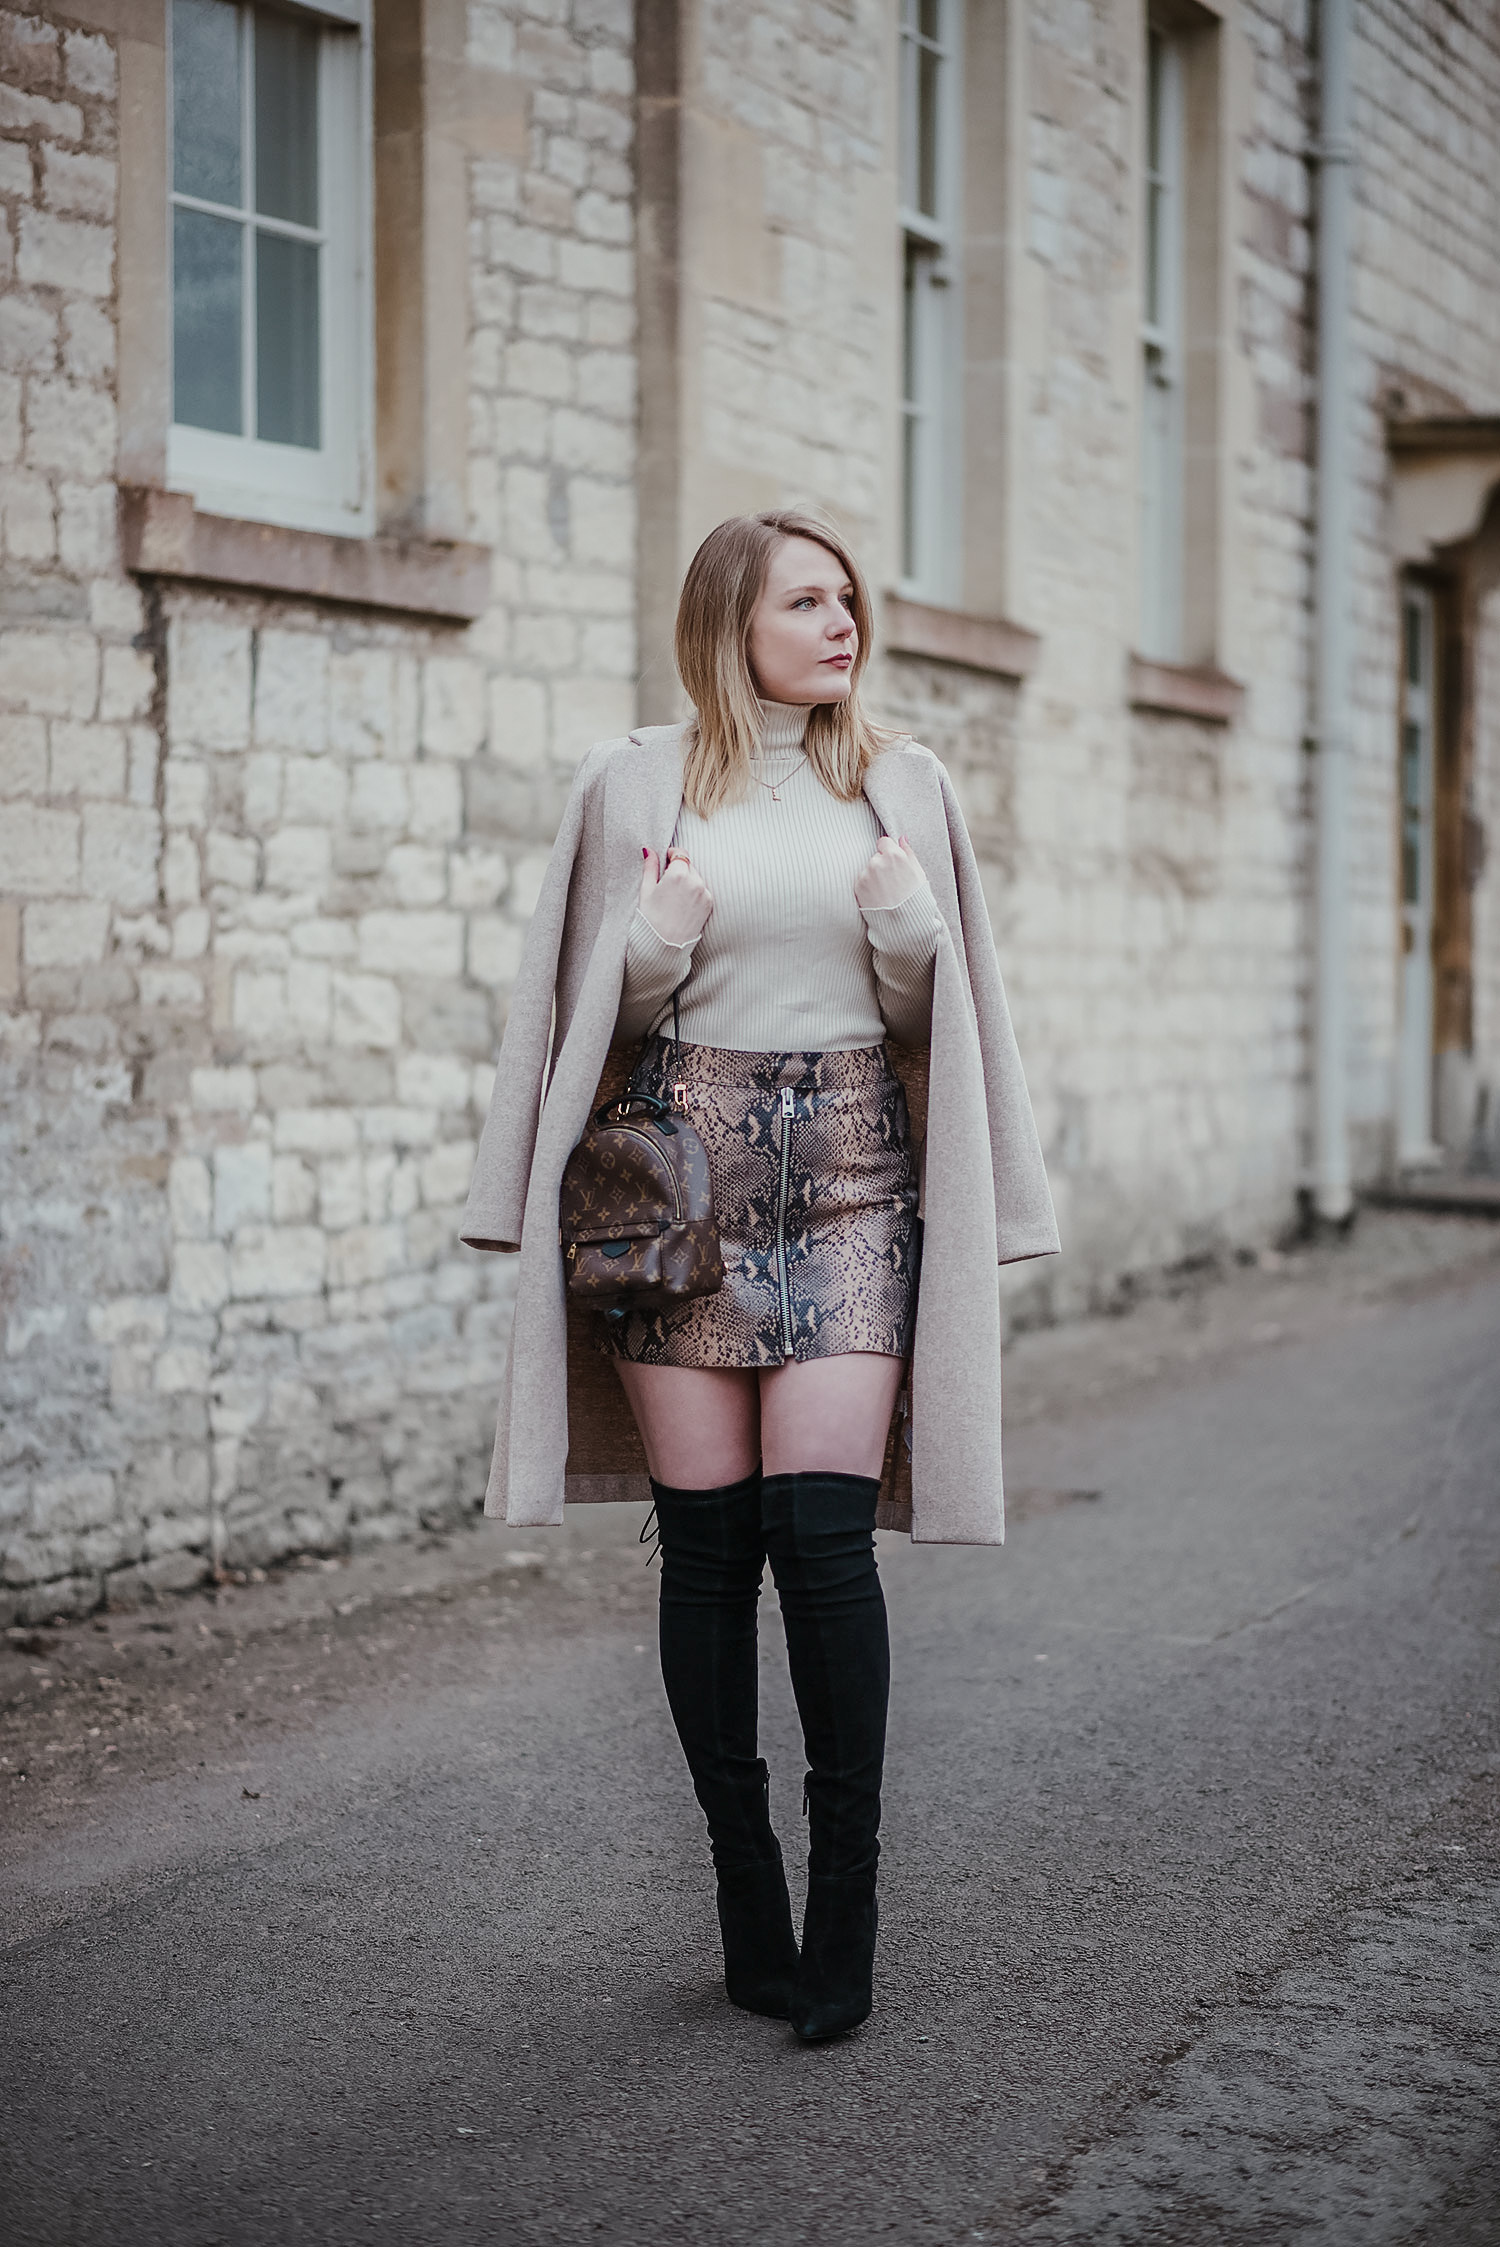 Leather Skirt And Thigh High Boots | vlr.eng.br